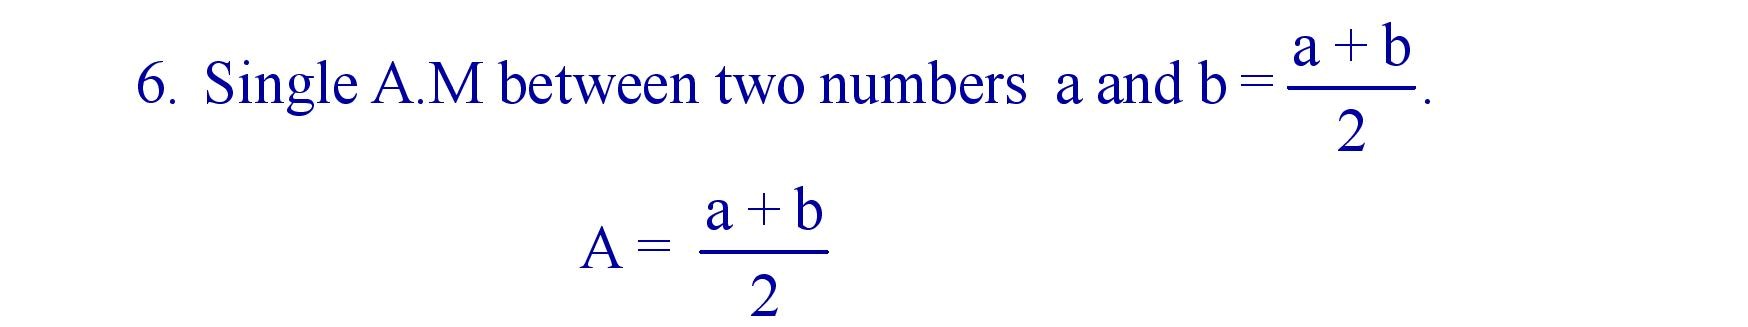 Single A.M between given two numbers a and b